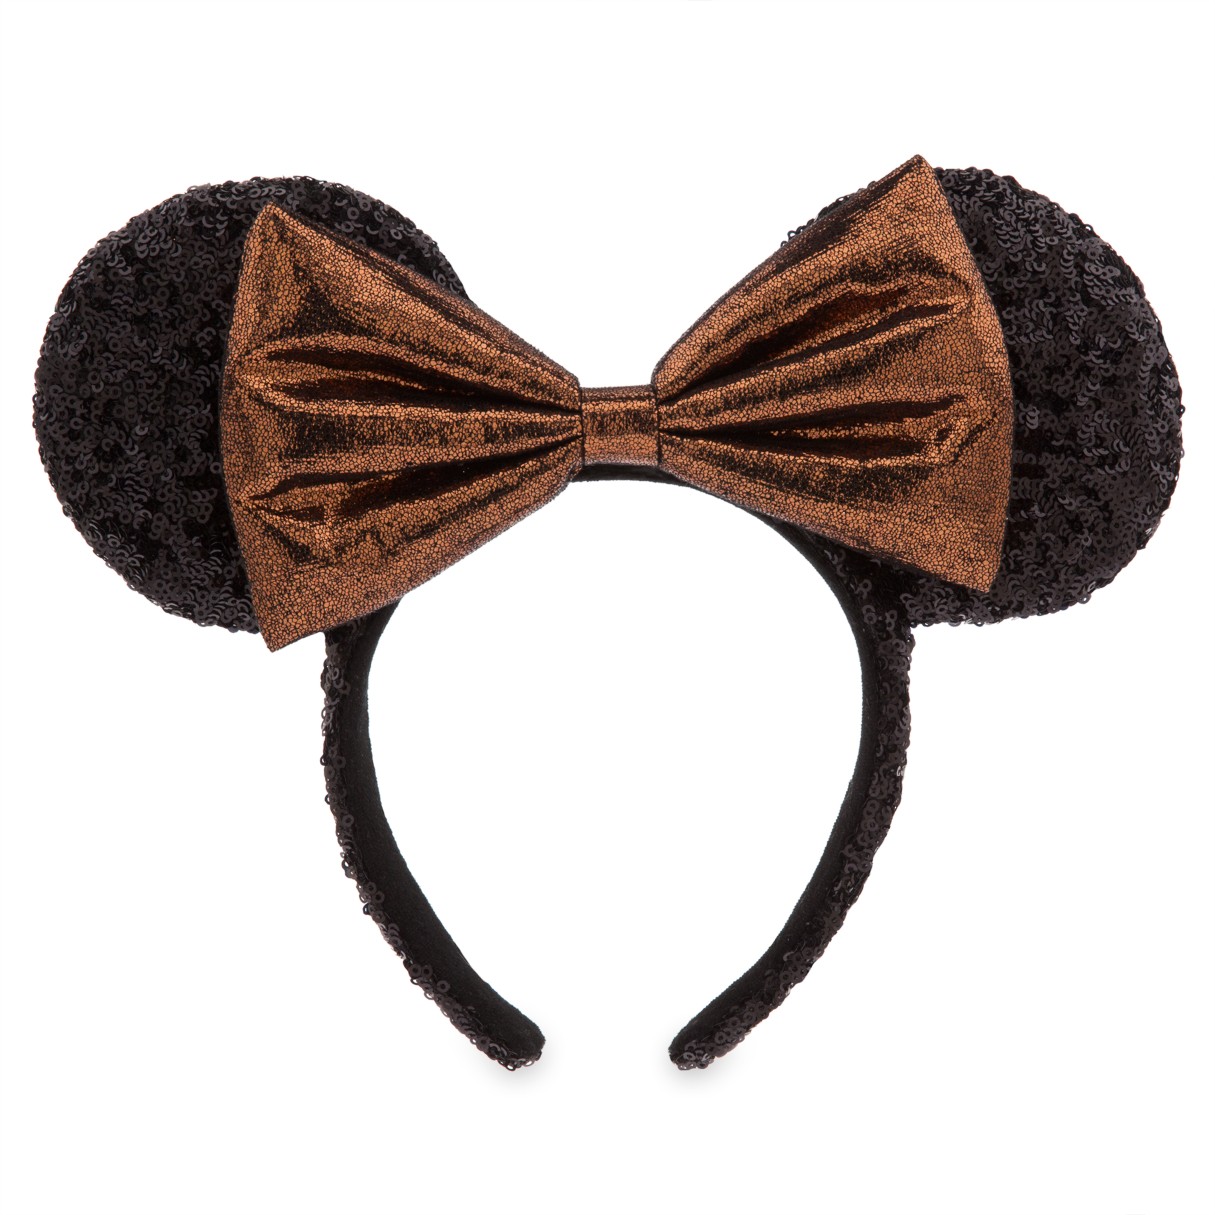 Minnie Mouse Sequined Ear Headband with Belle Bronze Bow